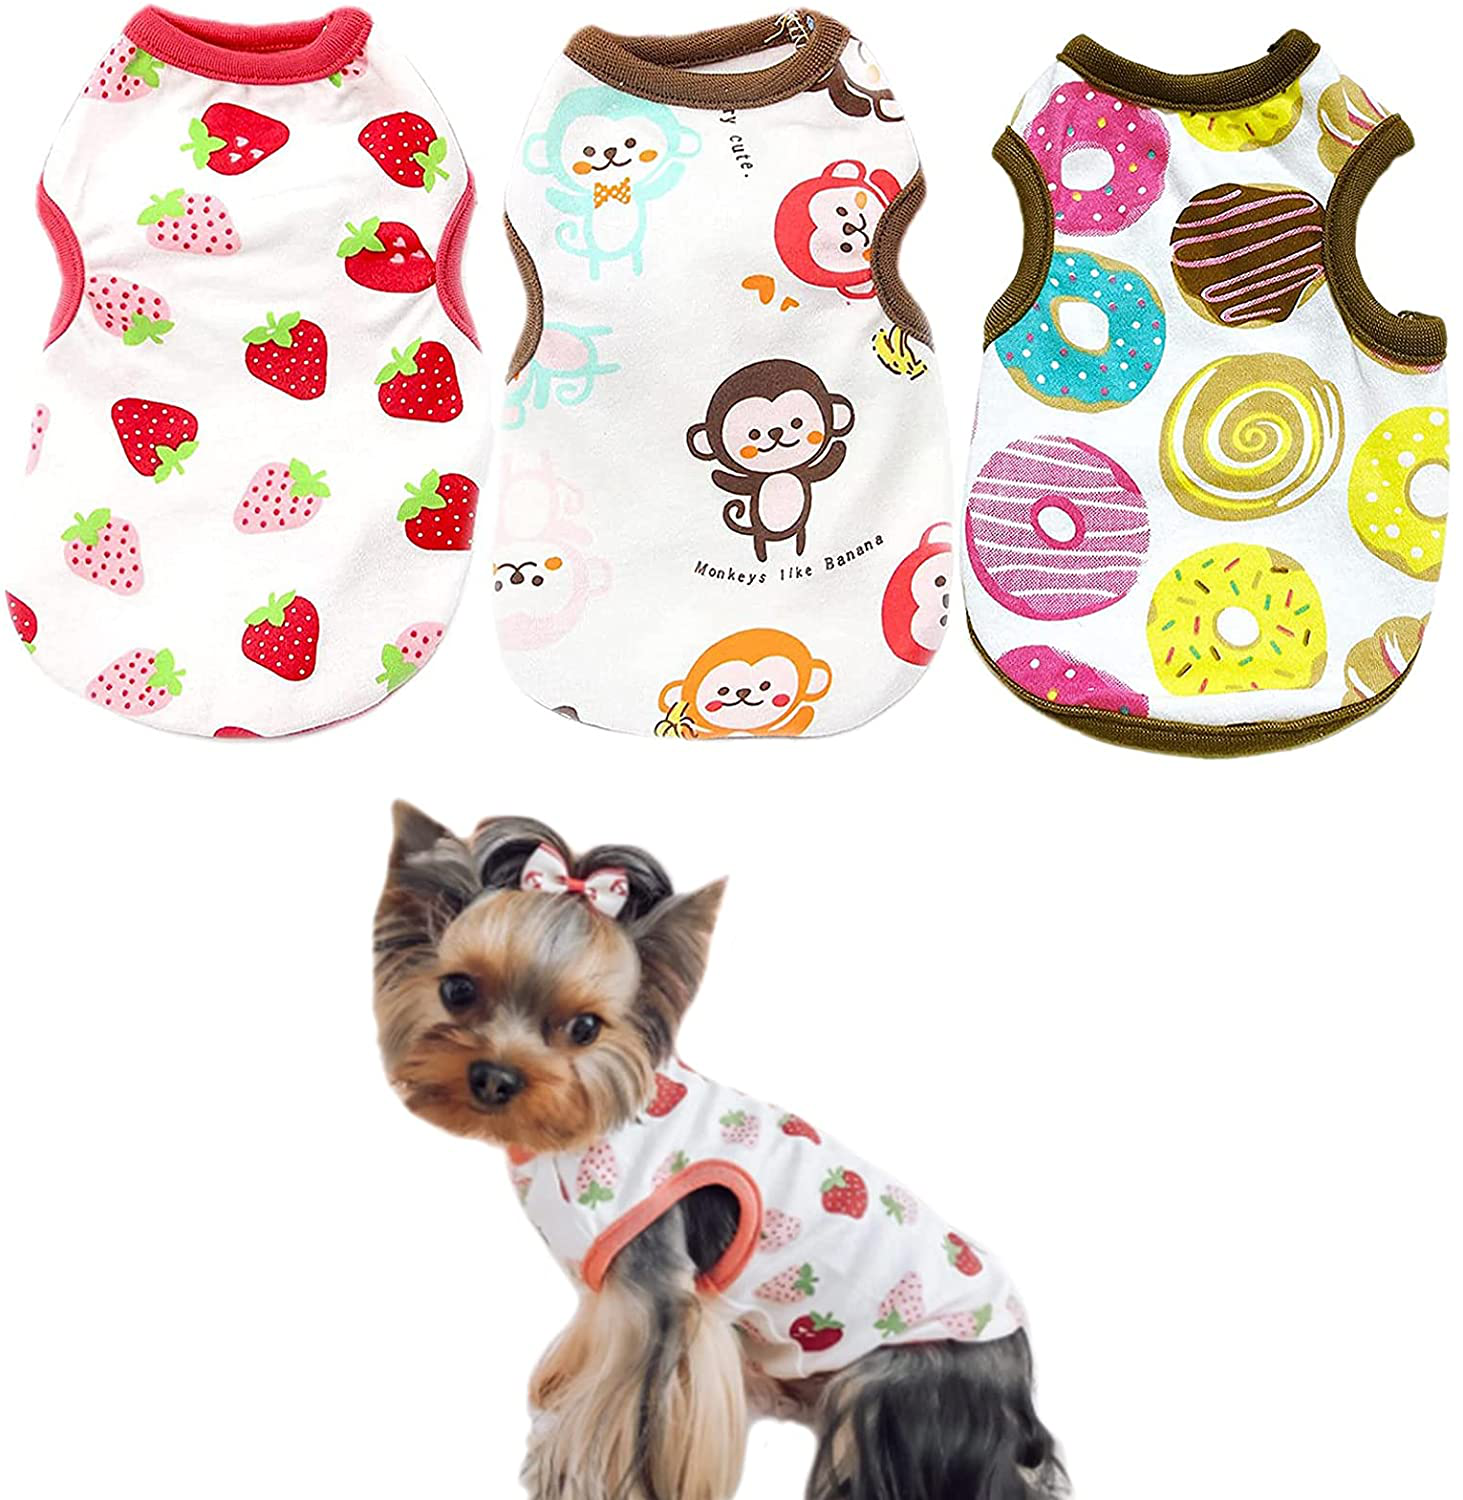 PETCARE 3 Pack Small Dog Shirt Soft Breathable Cotton Pet Puppy Clothes Cat Tee Sleeveless Vest Cute Print T Shirts for Small Breed Dogs Cats Clothing Chihuahua Yorkies Shih Tzu Pomeranian Outfits